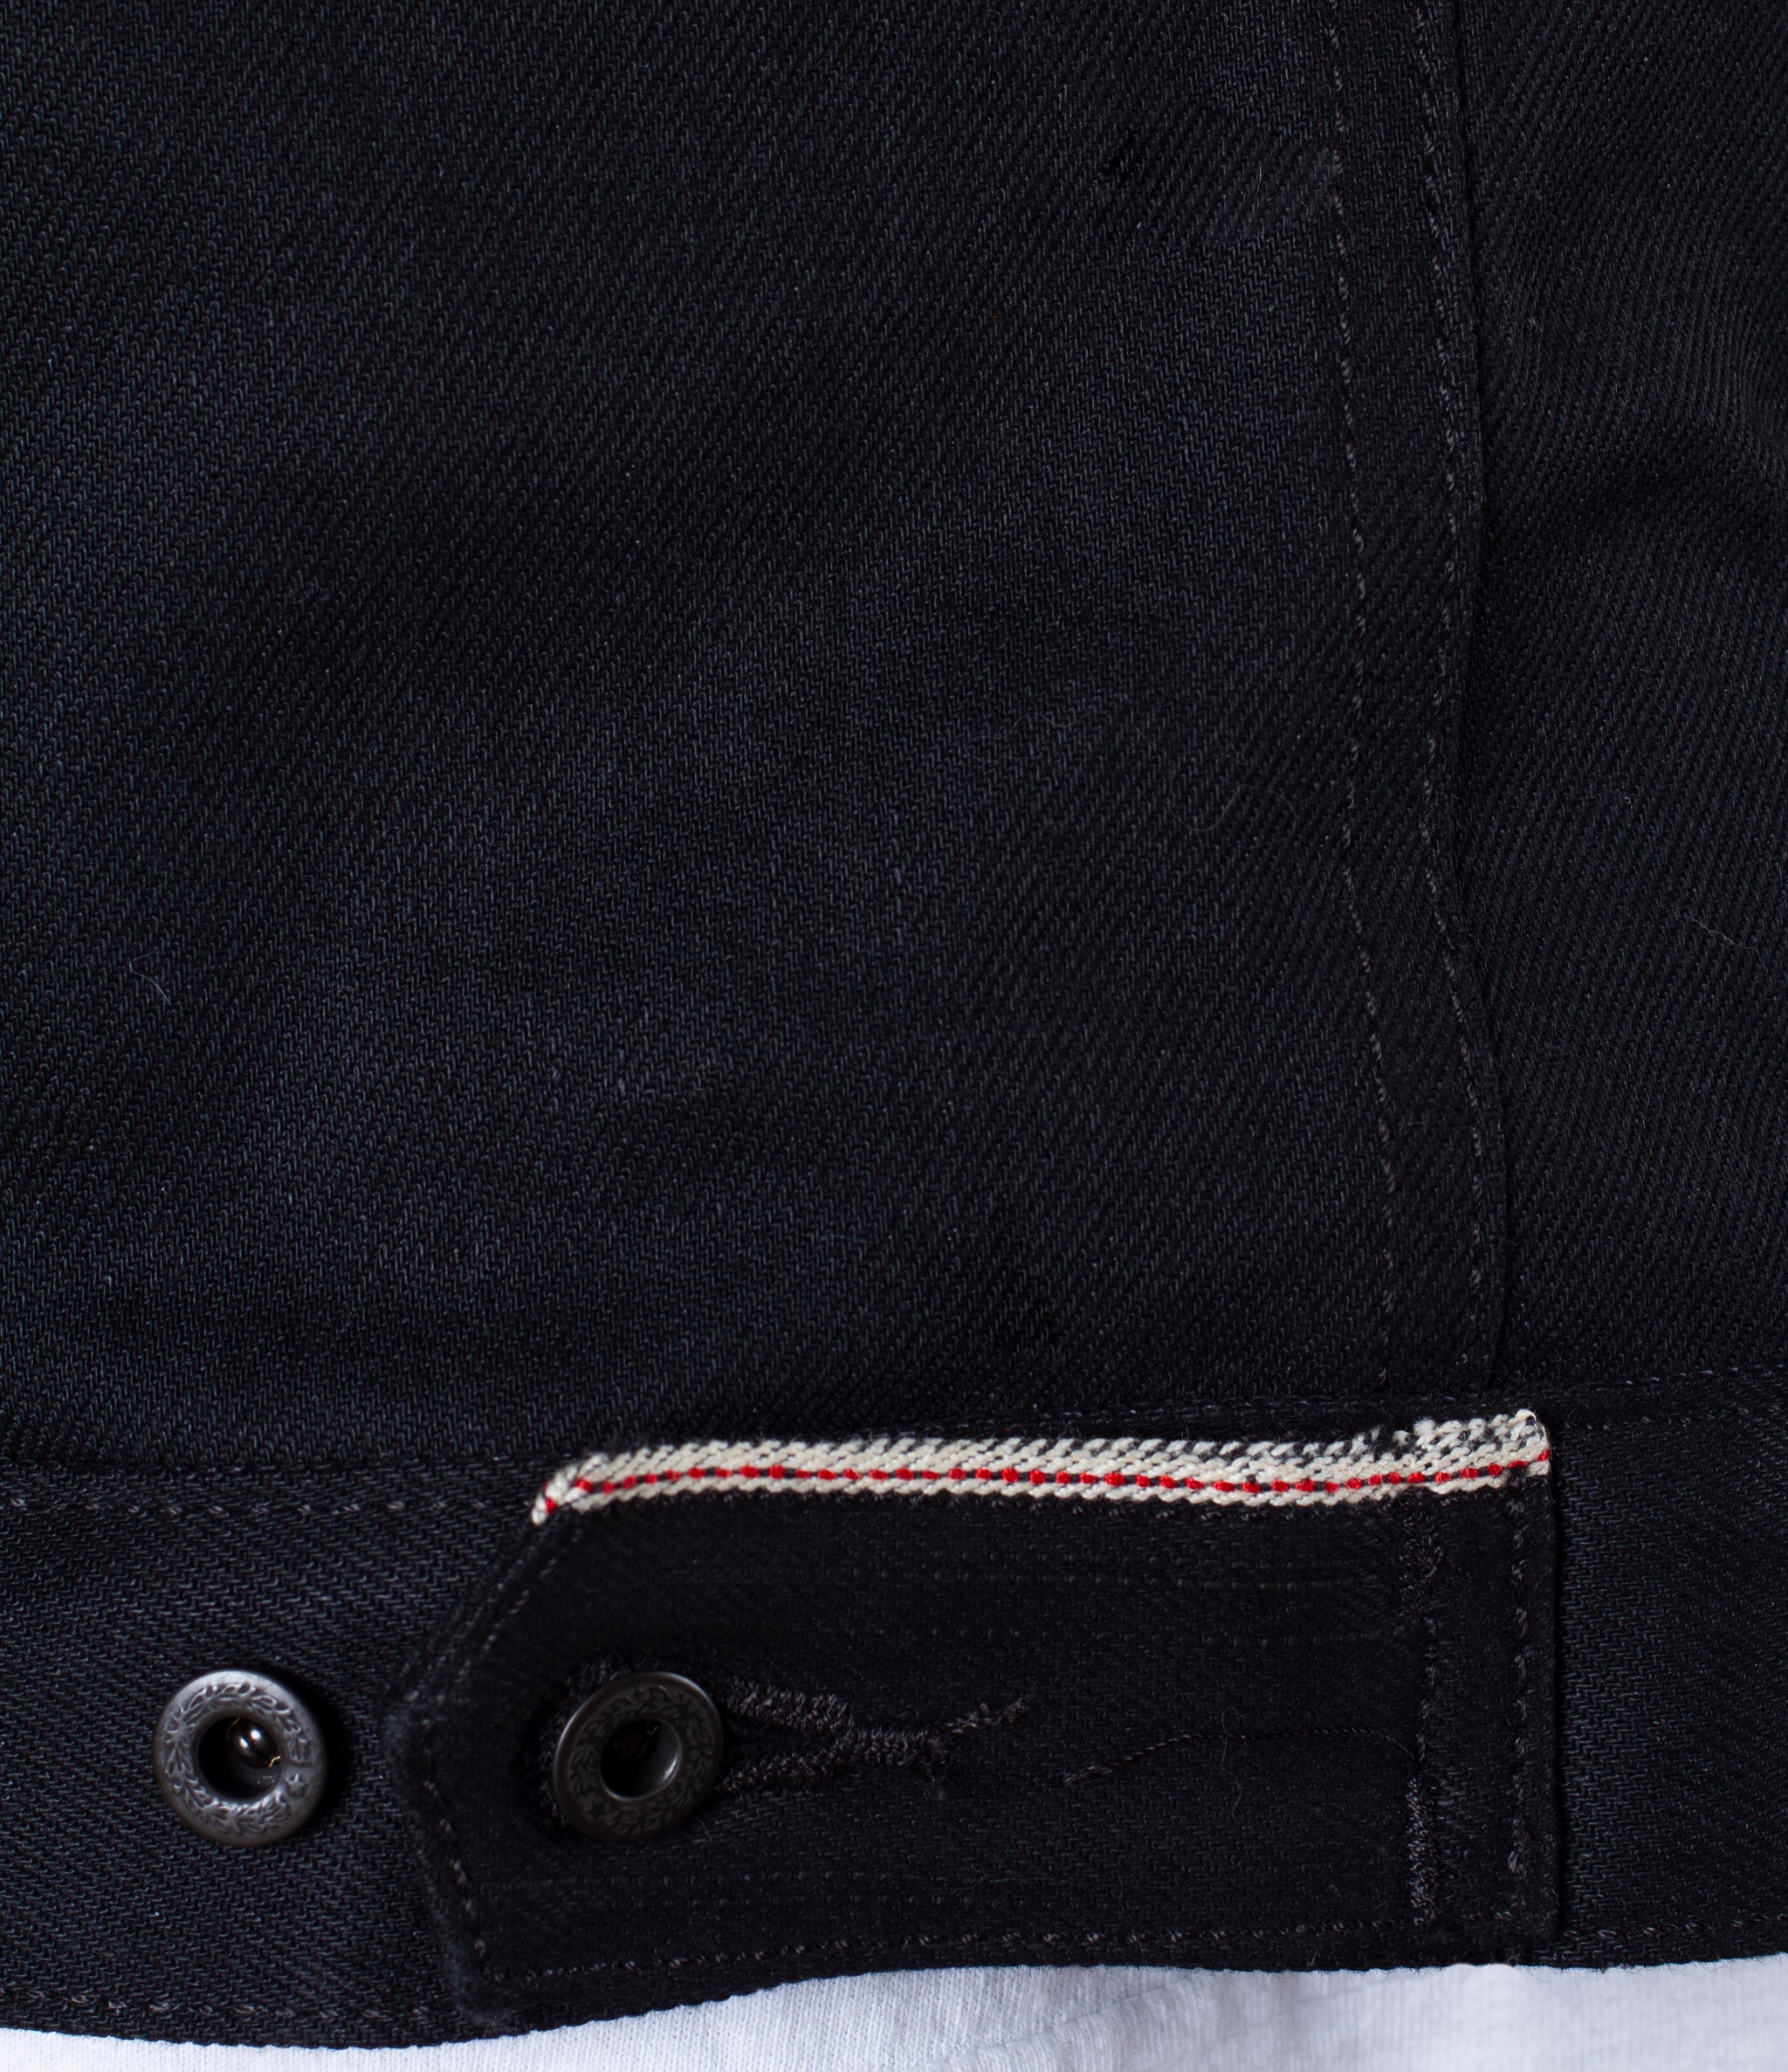 $72+ Pre-Order Selvage Collection - Brave Star Selvage